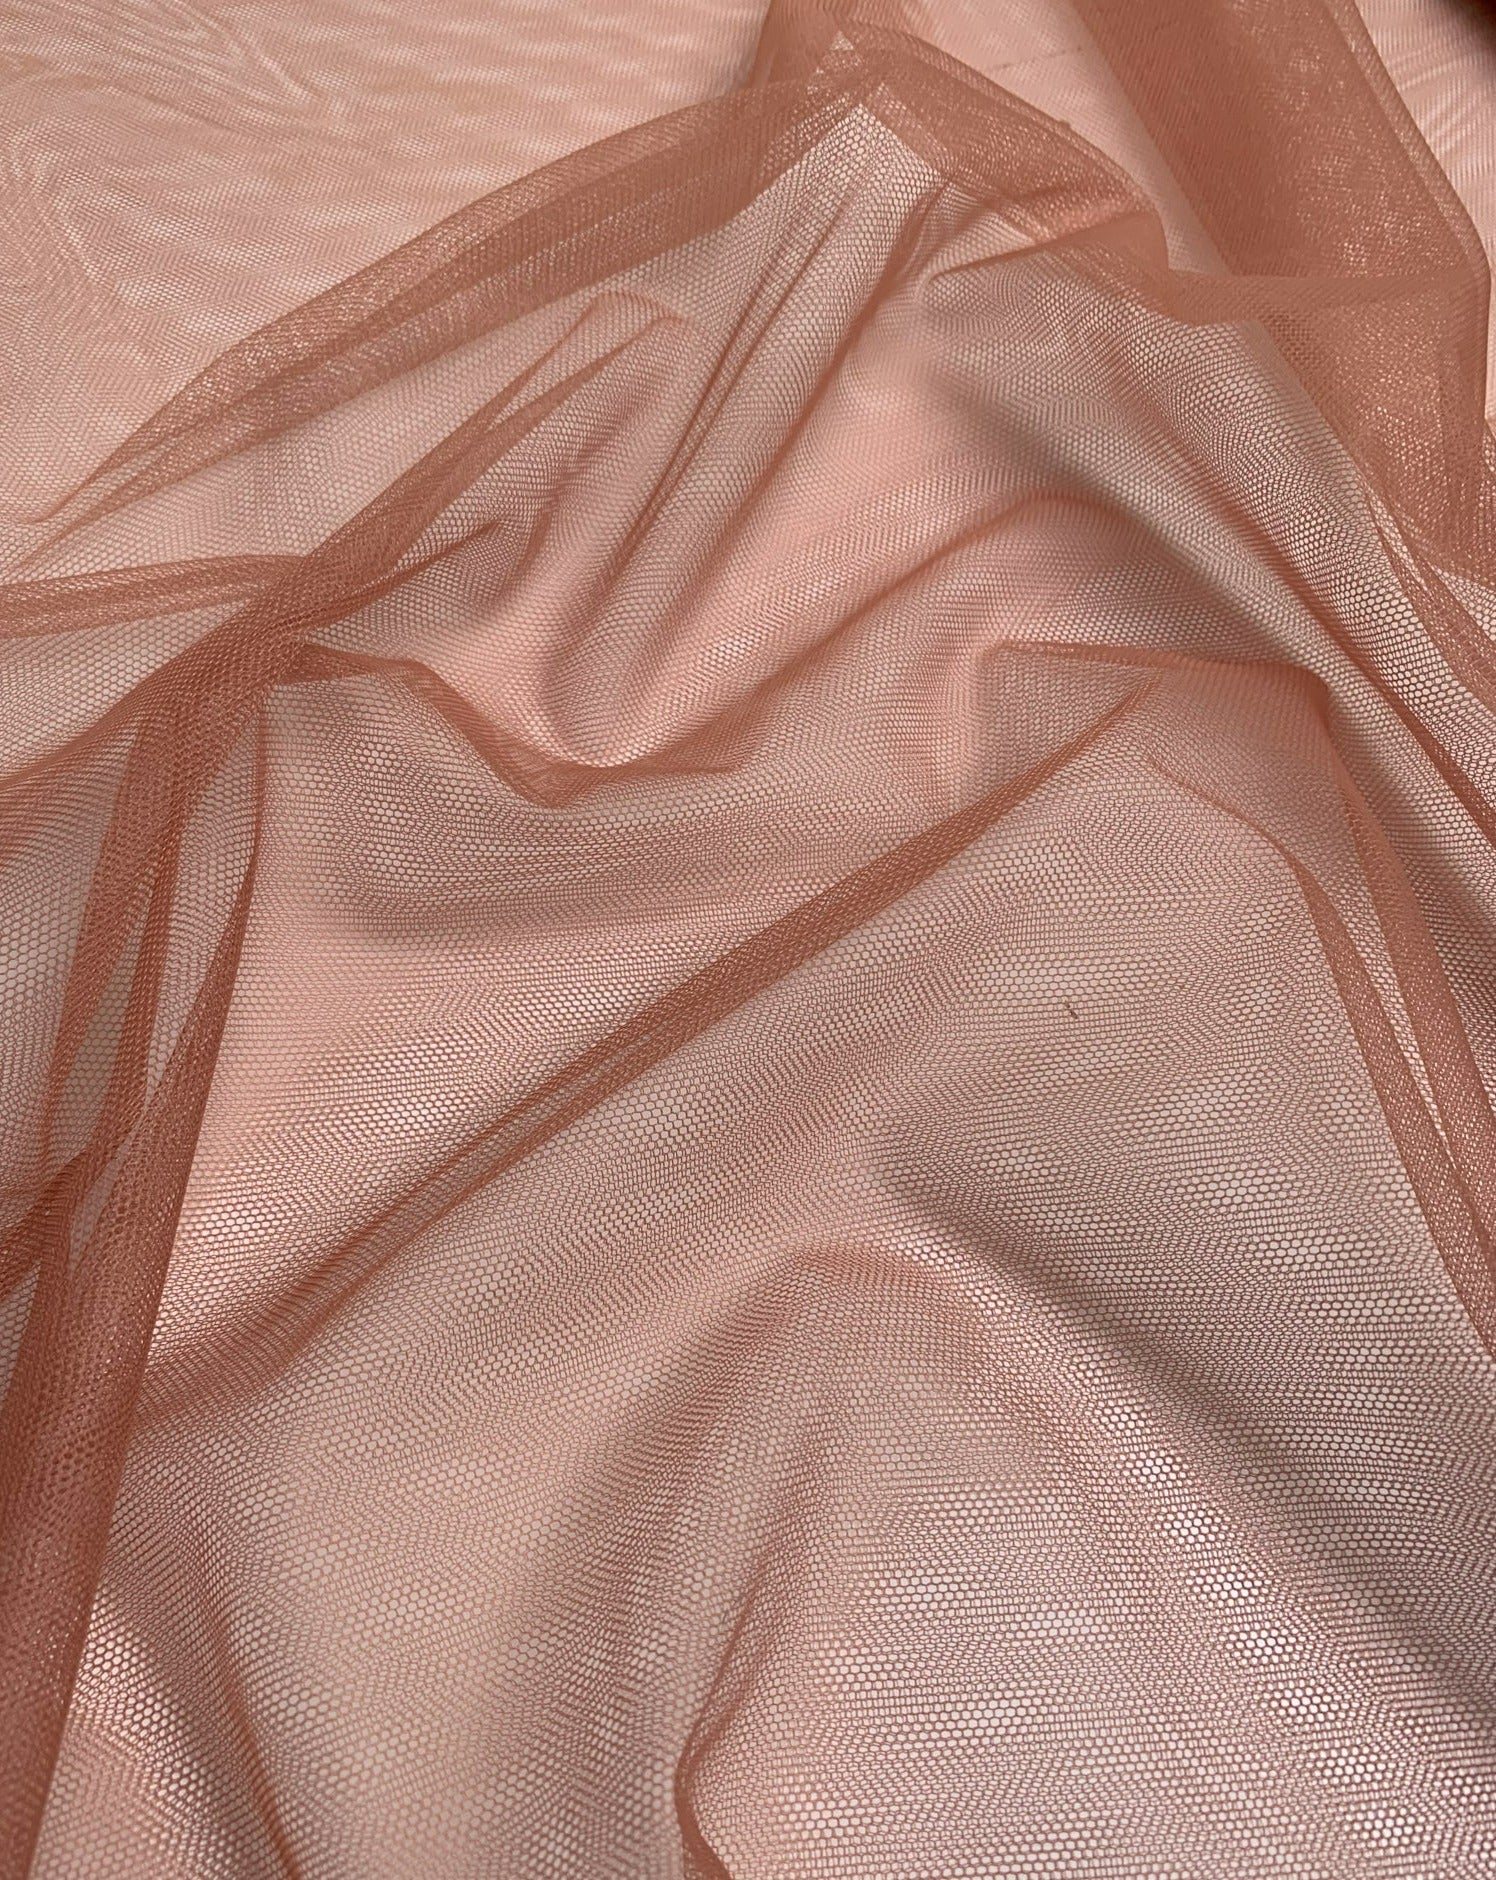 No. 1103 nude tulle